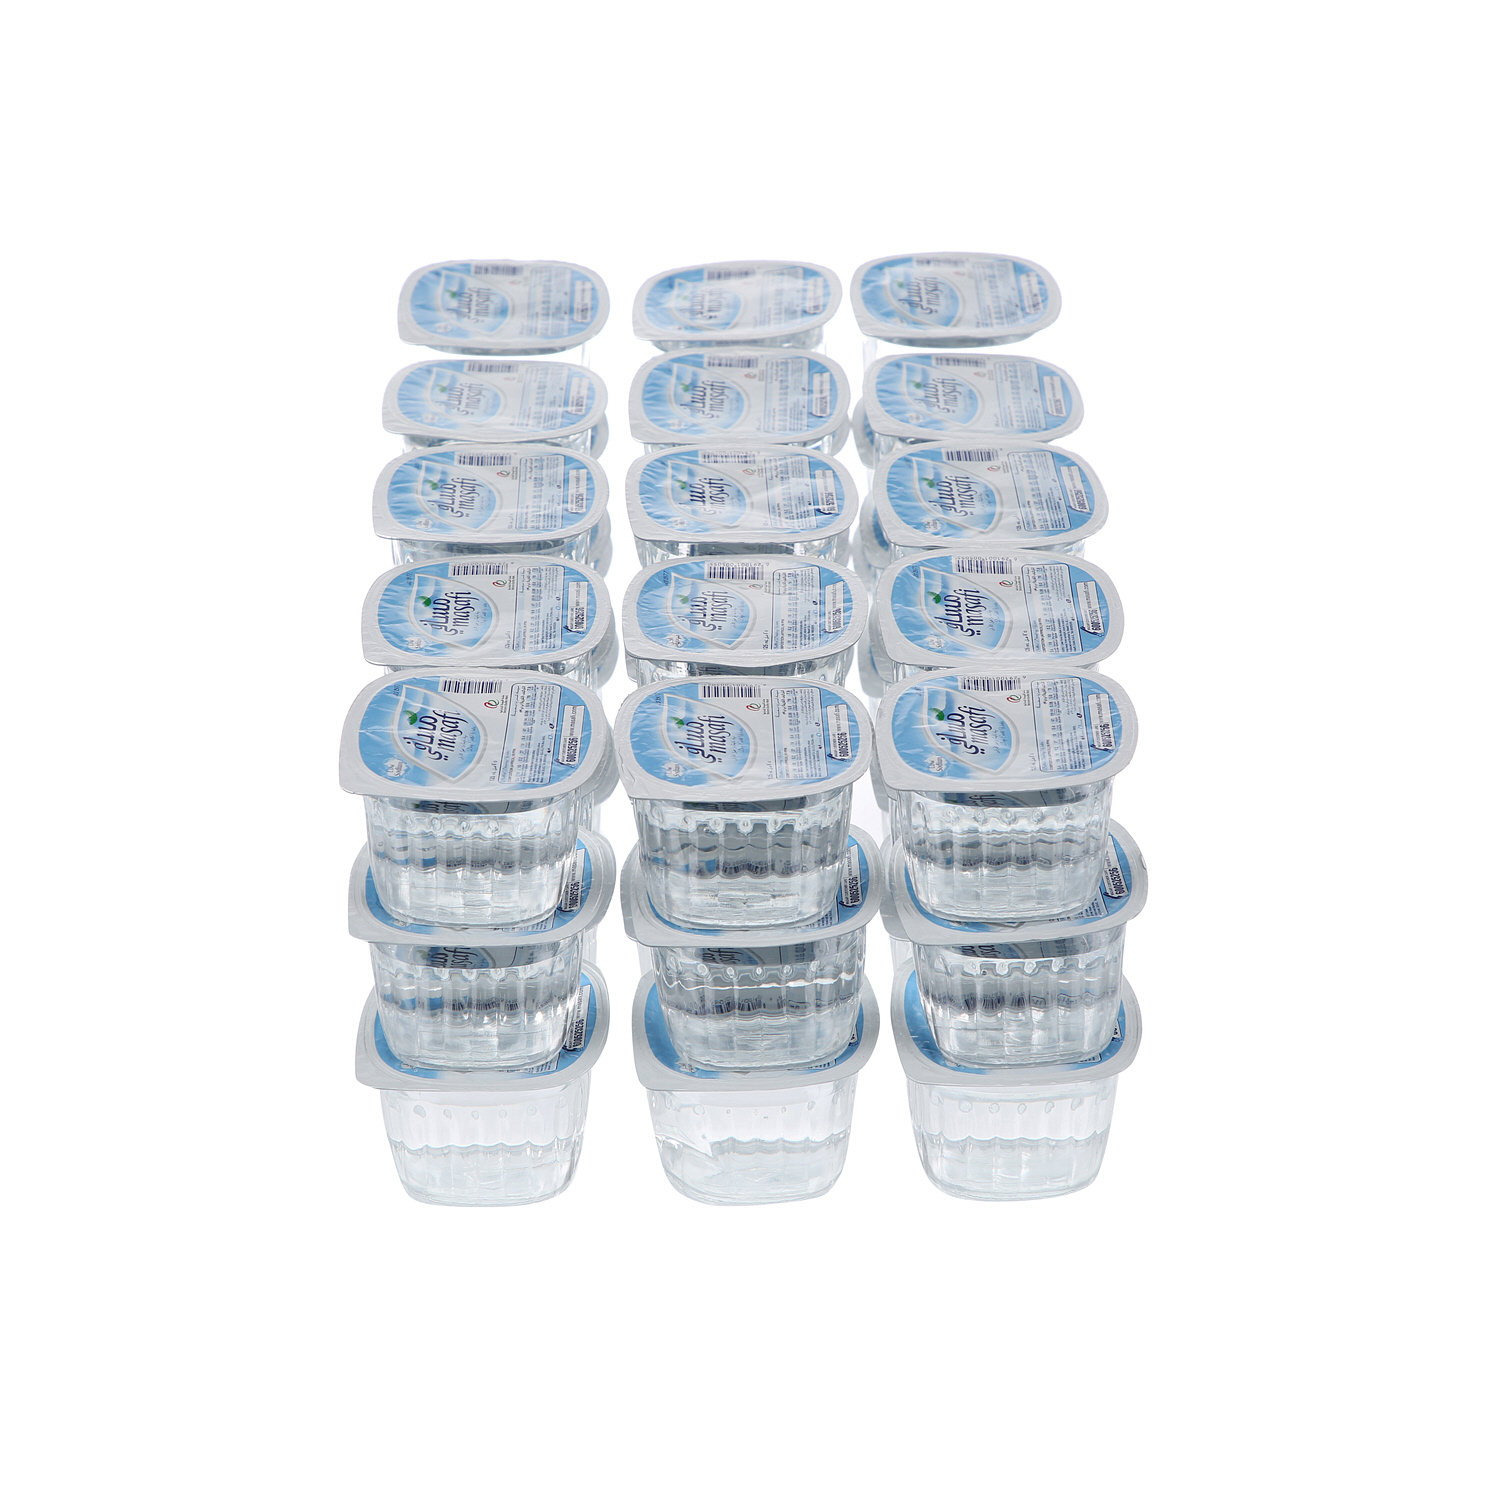 Masafi Mineral Water Cup 125 ml × 45 Pack